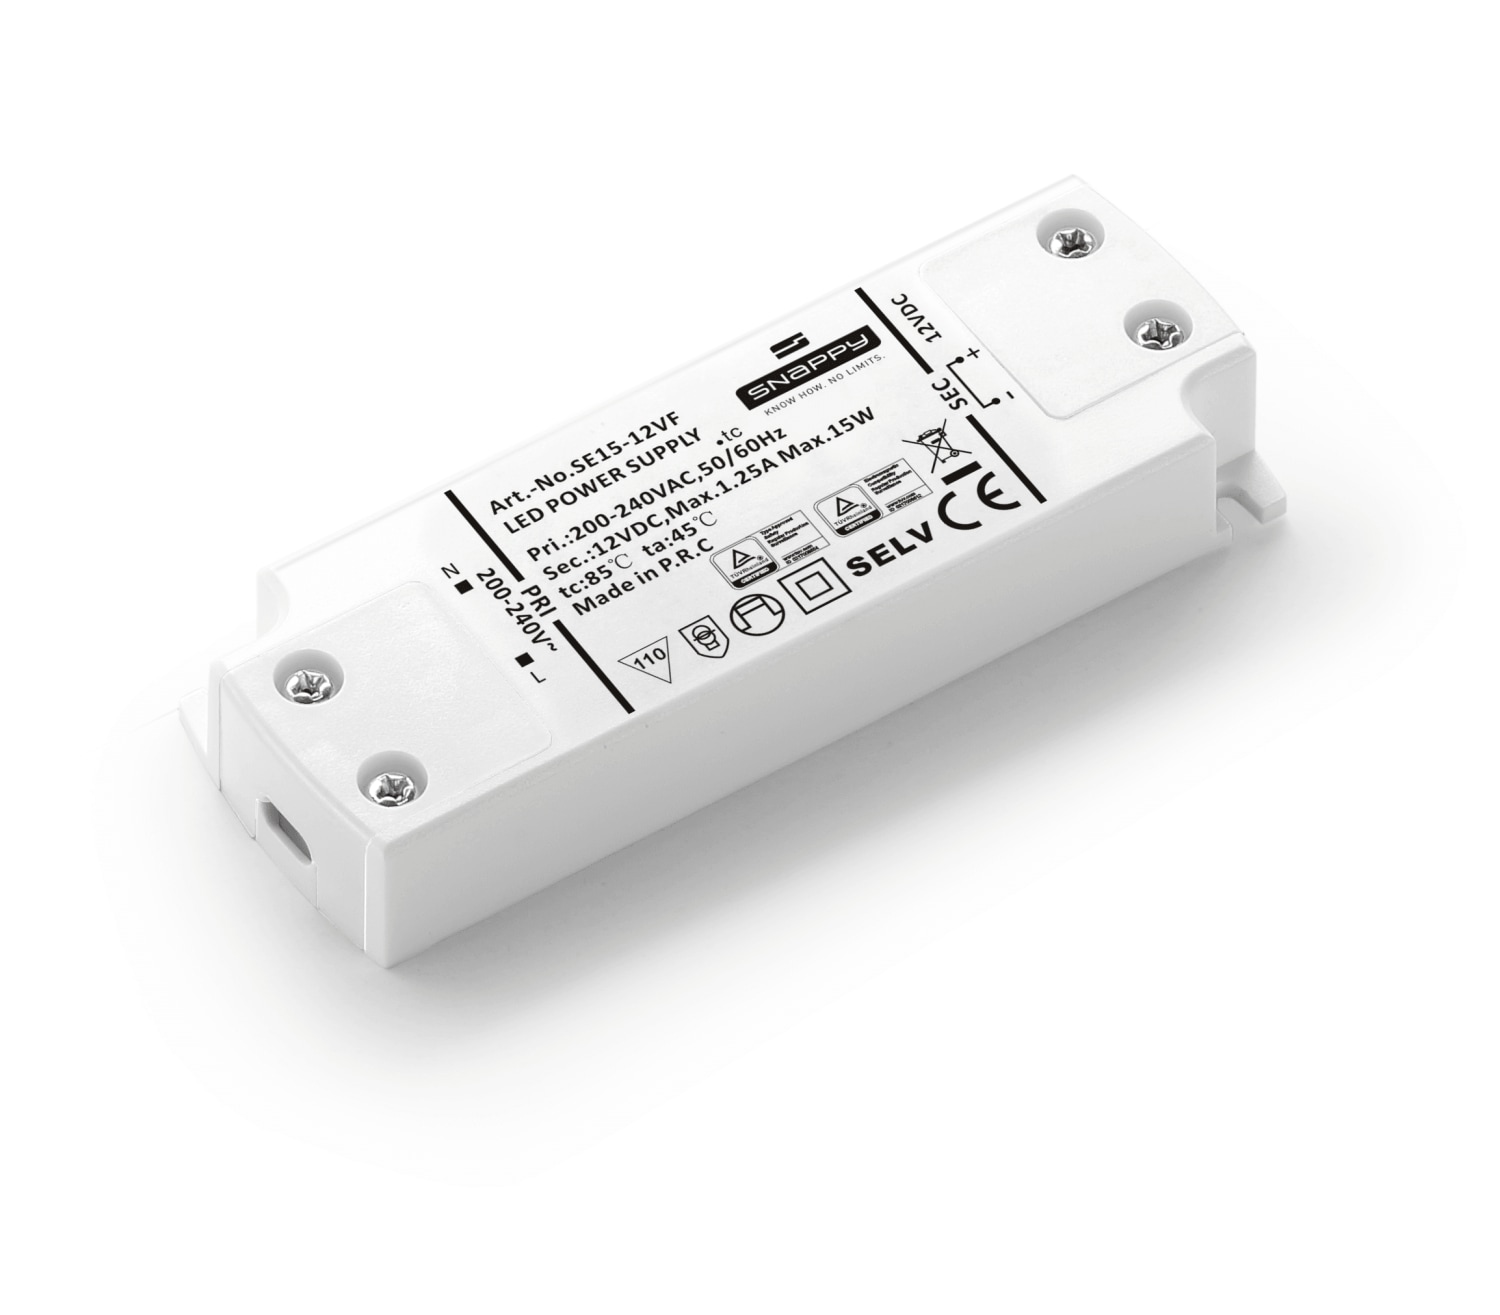 LED Driver Snappy 15W 12VDC (4262005030) billigt ‒ WATTOO.DK